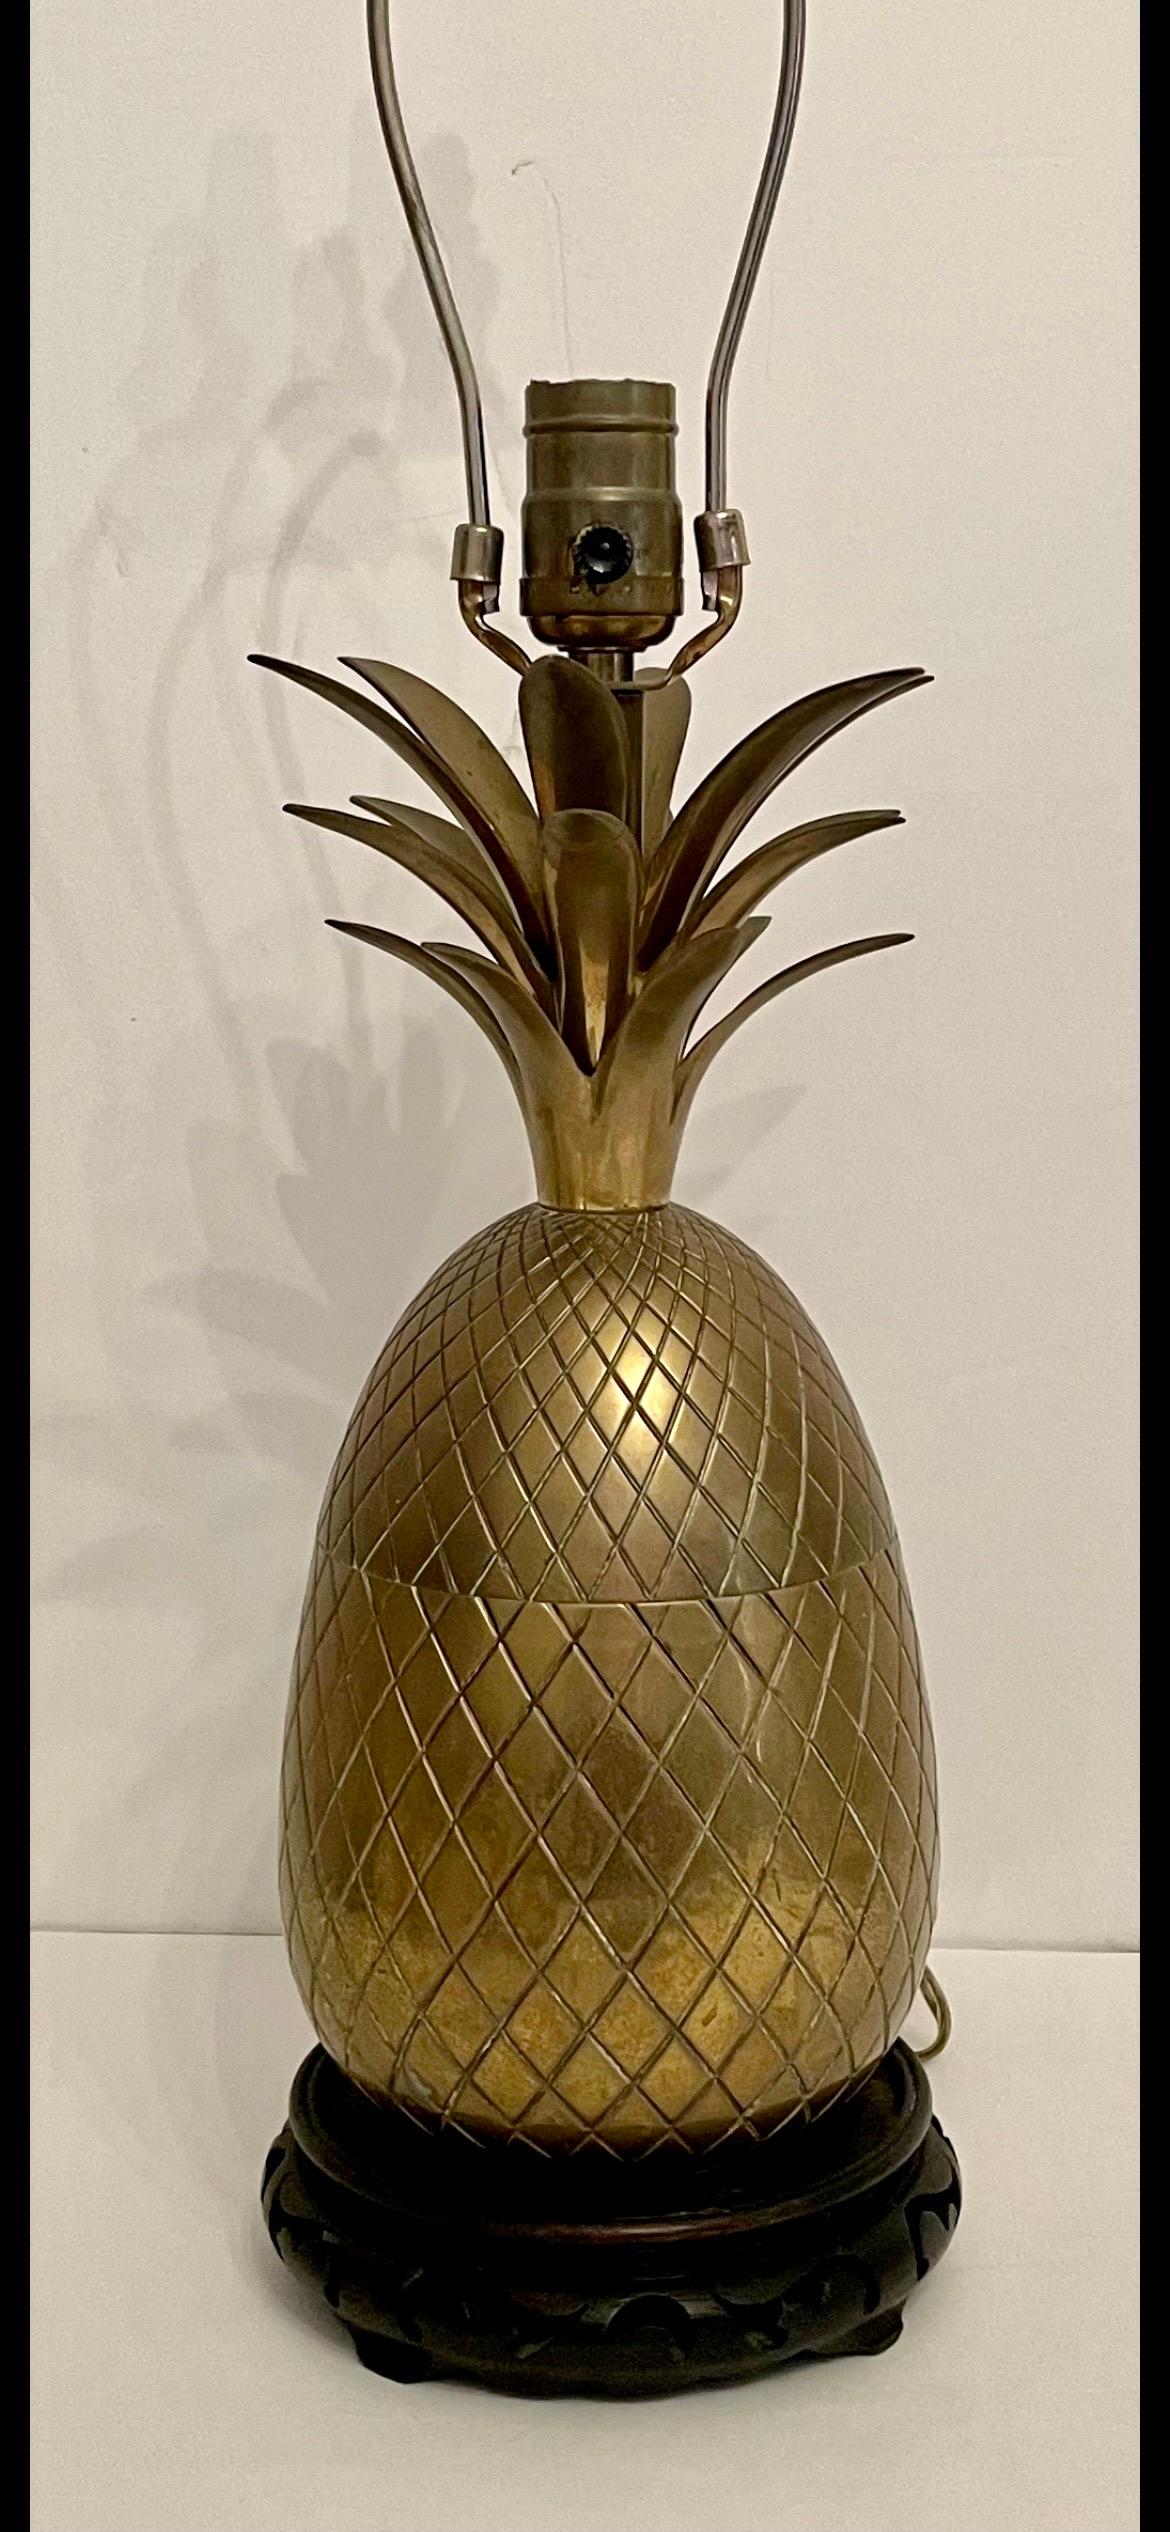 Italian brass pineapple lamp on carved wood base. Good original condition, patina from age and use. Good overall condition. Measures 24